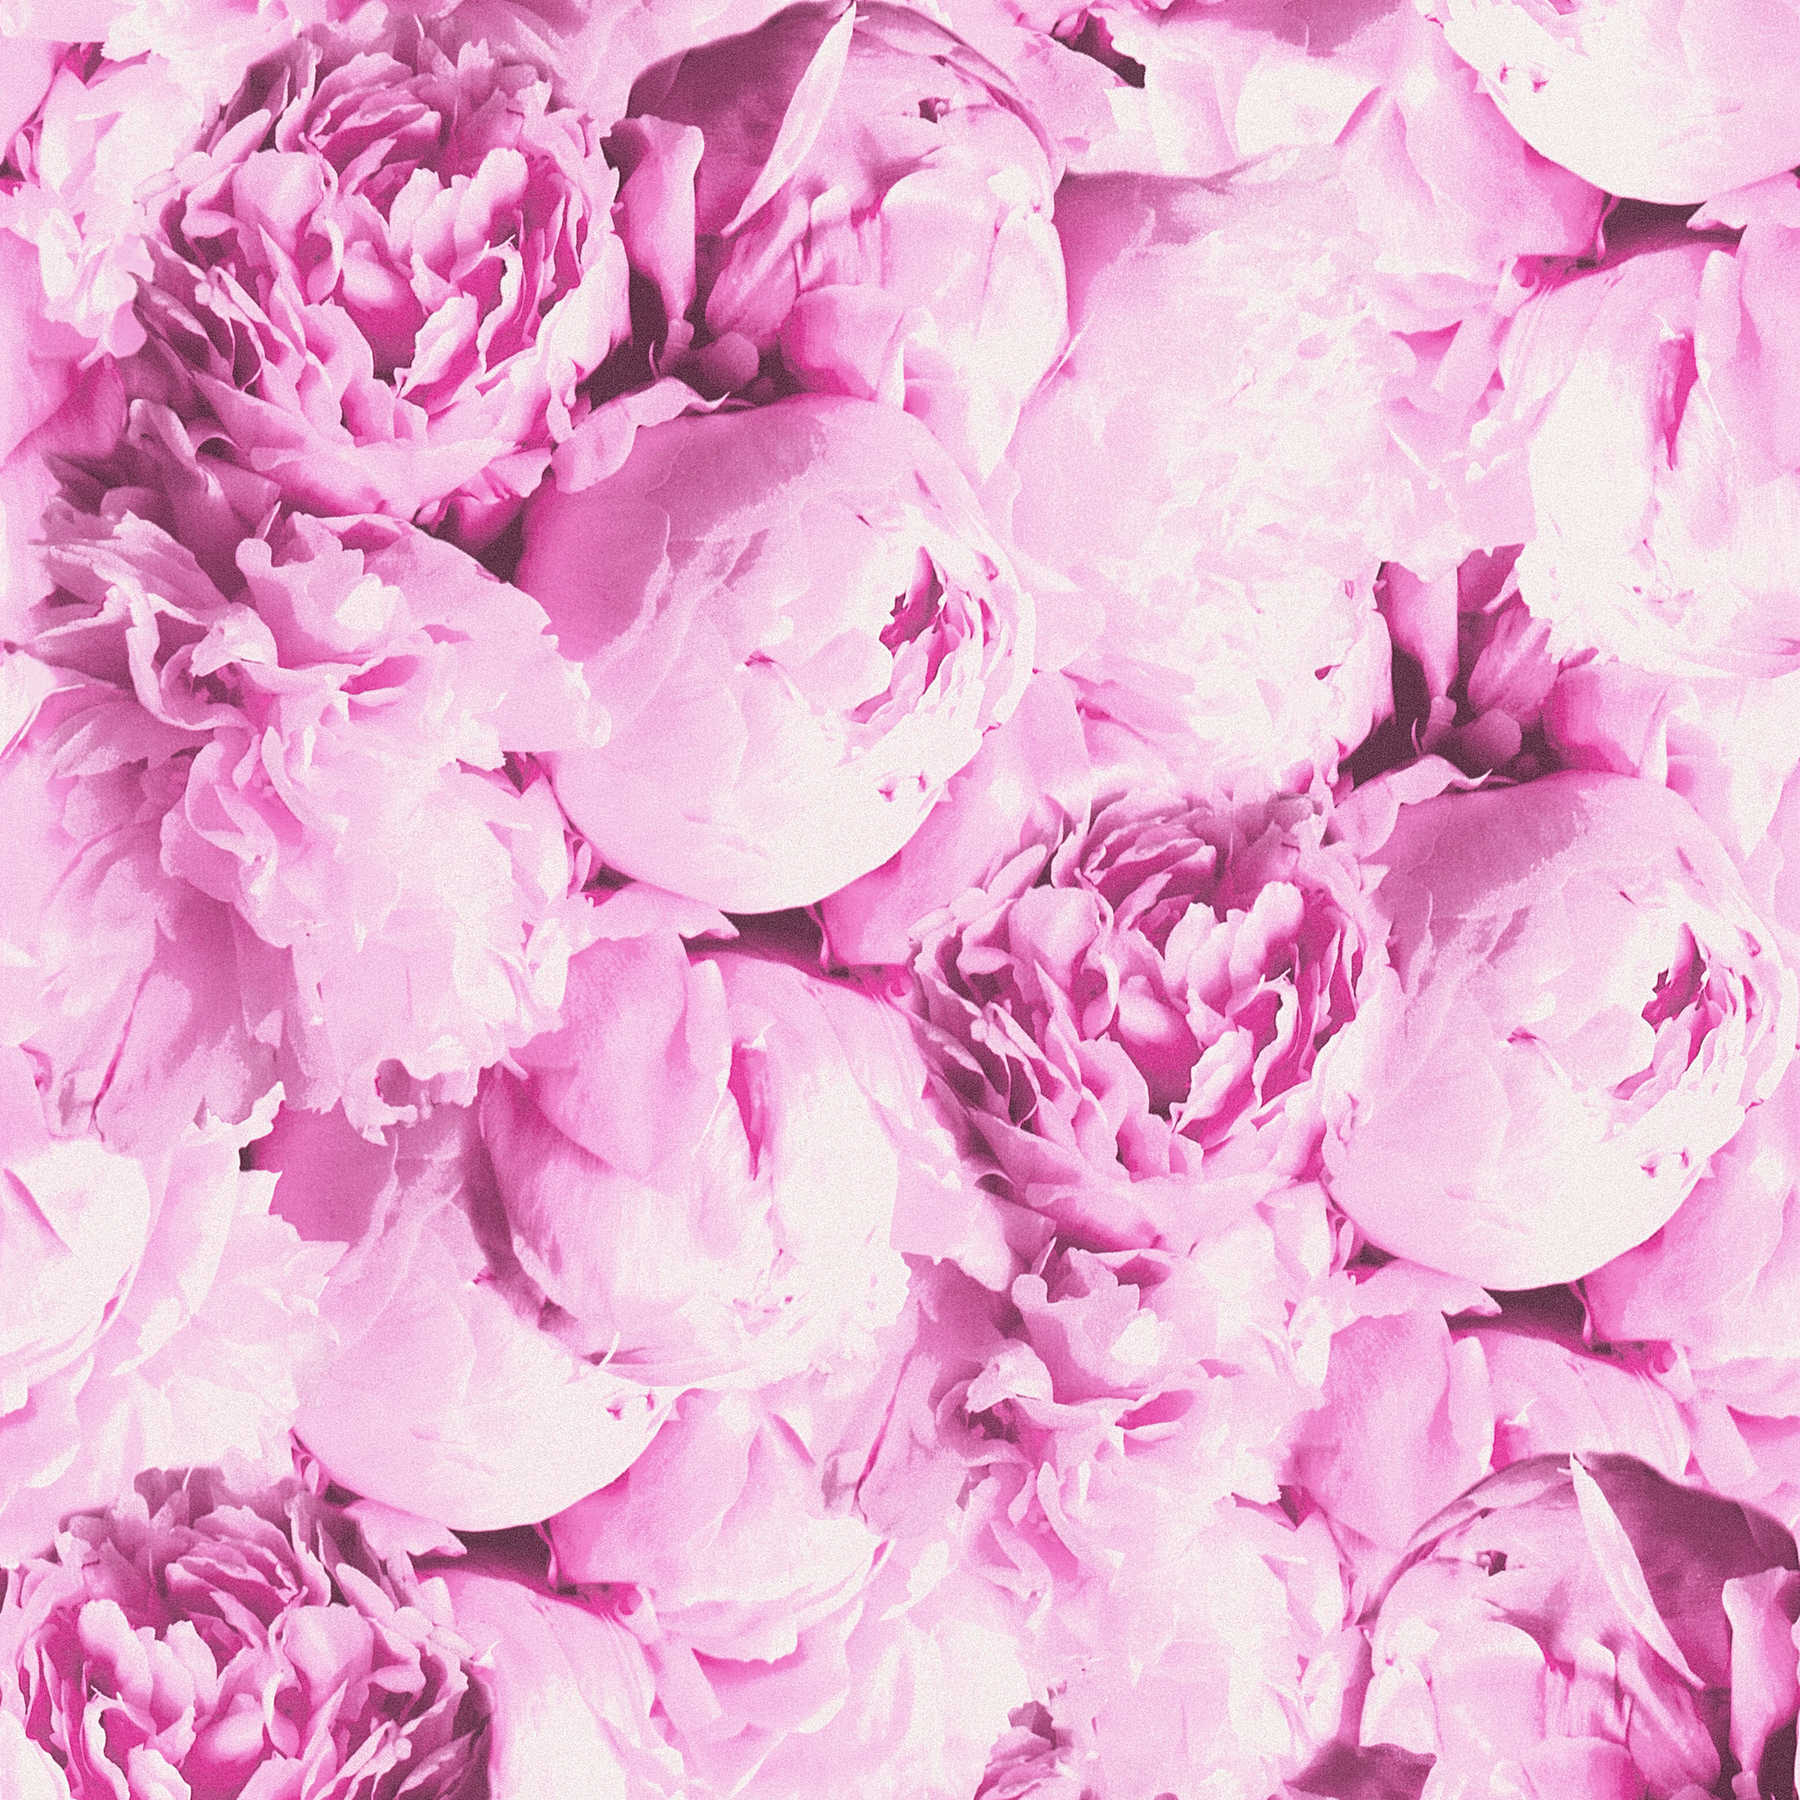 Floral wallpaper roses with shimmer effect - pink
